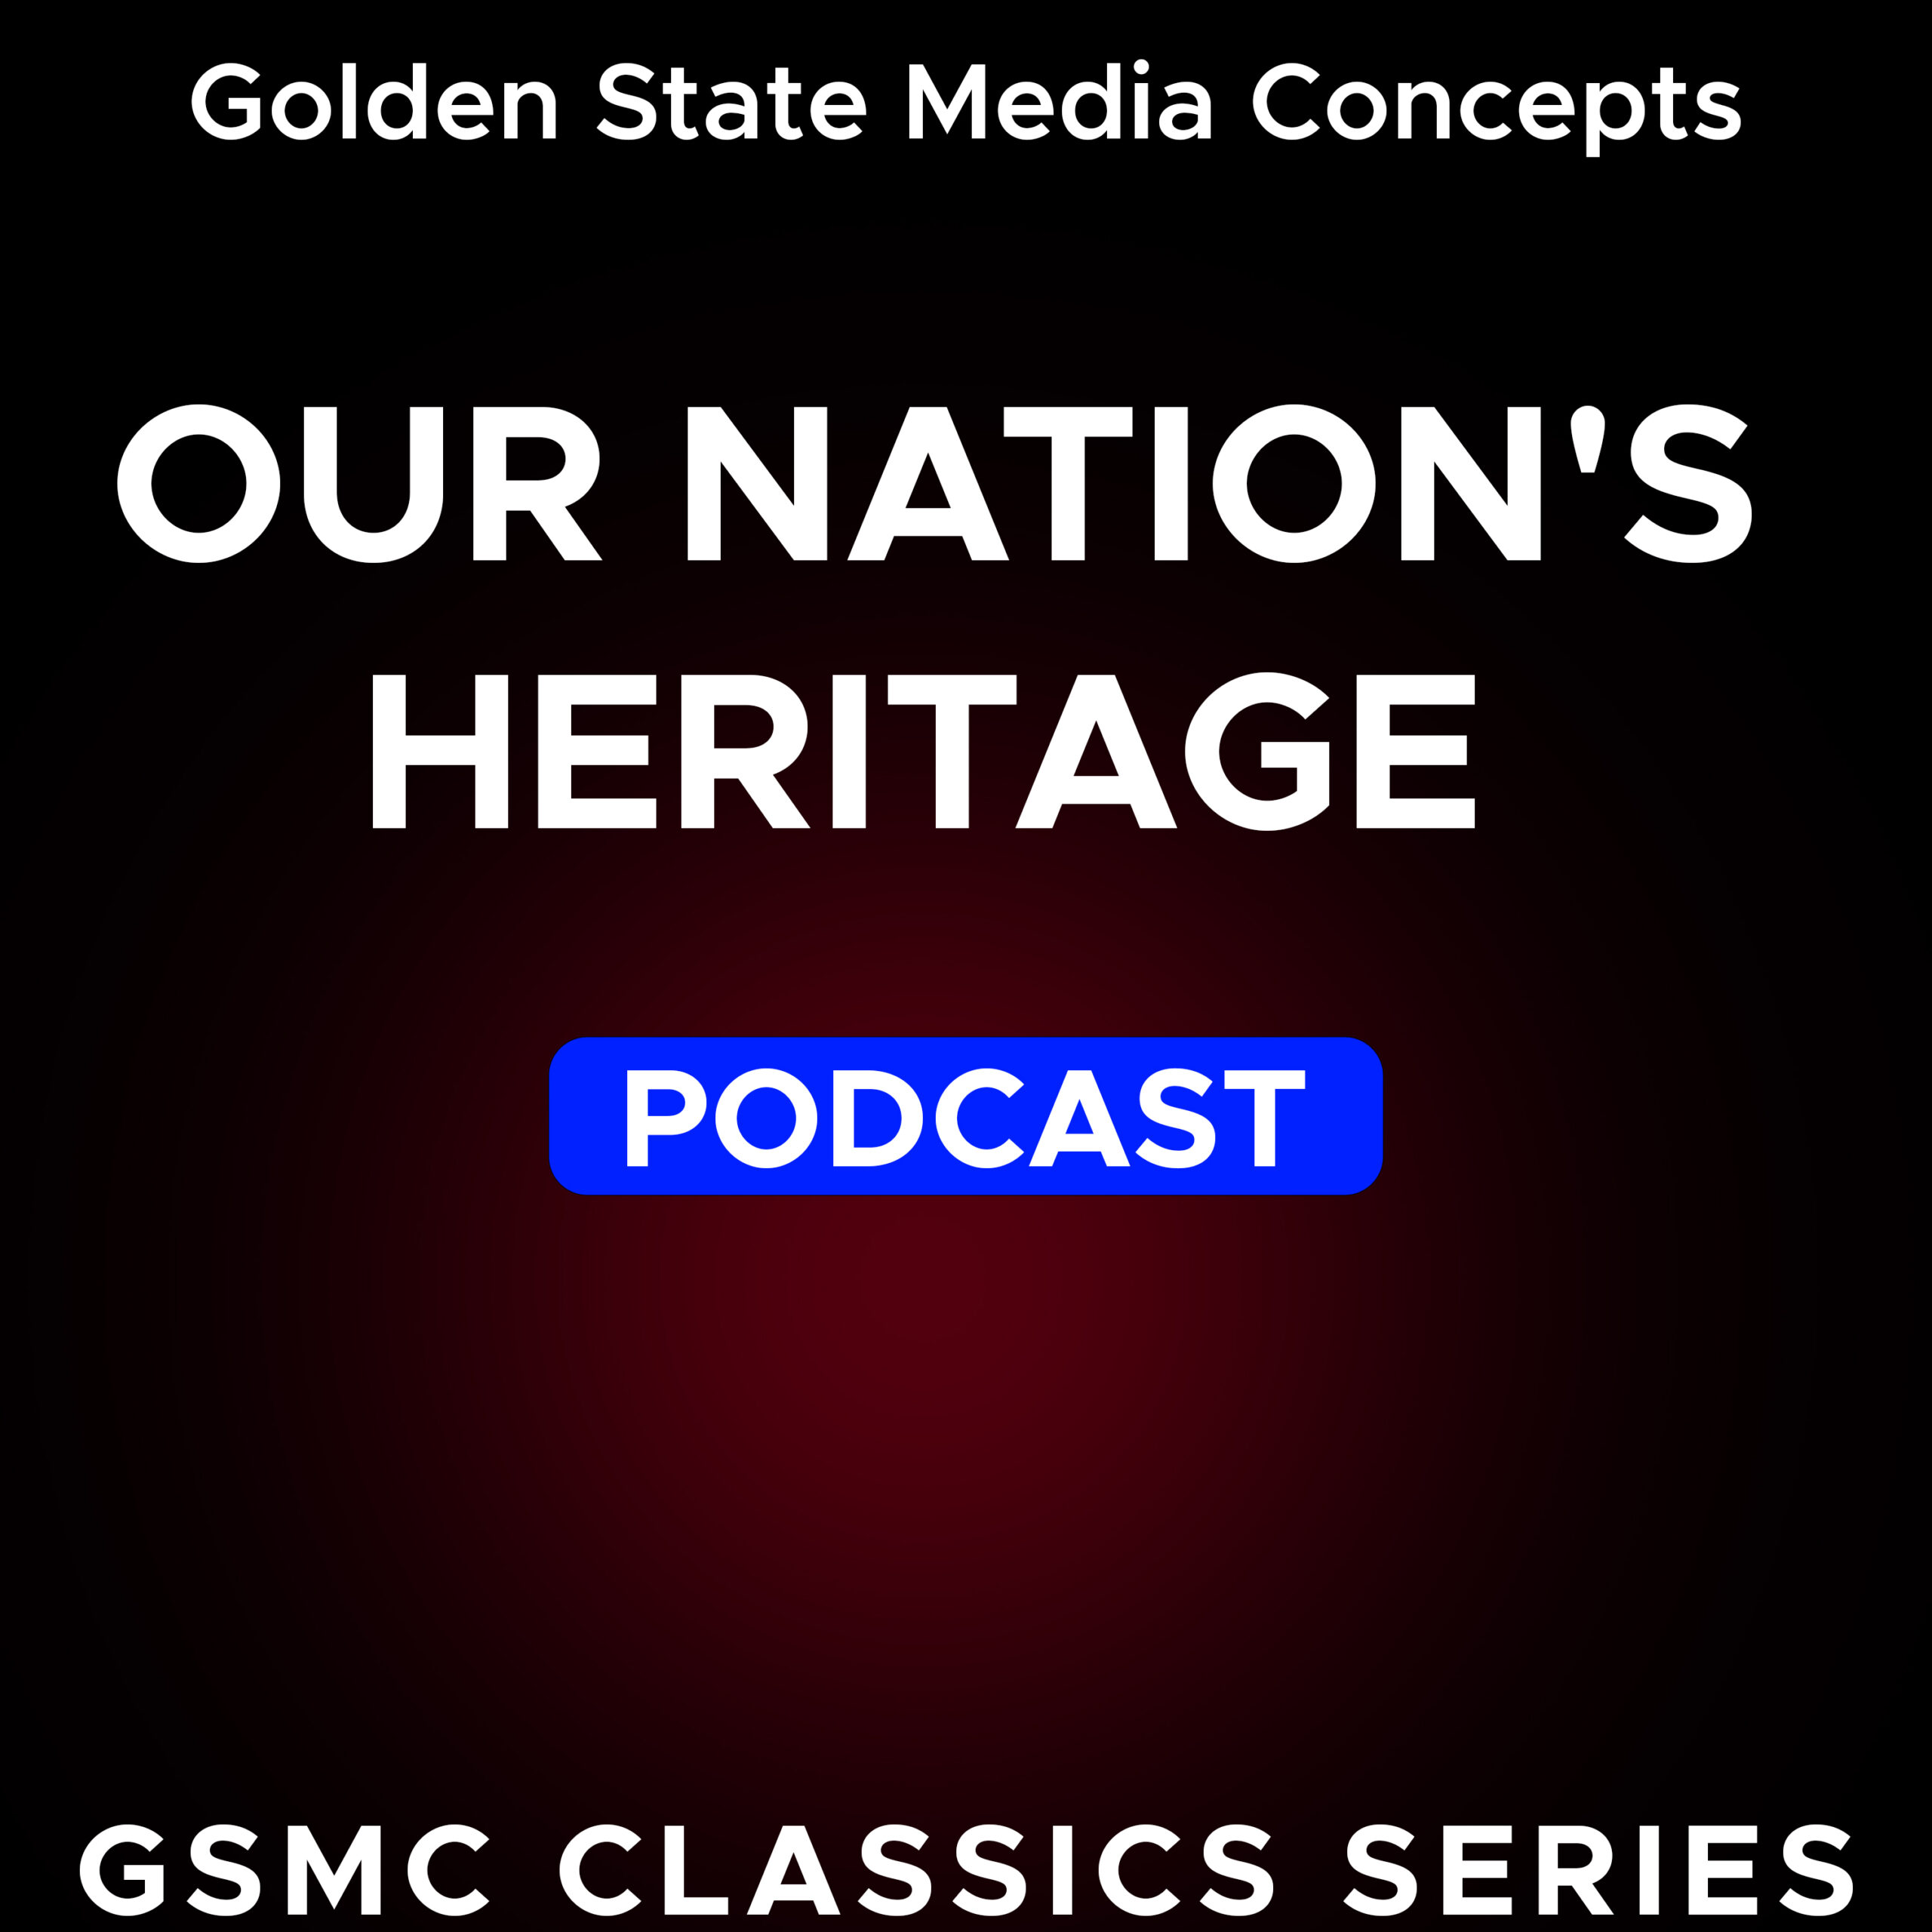 GSMC Classics: Our Nation’s Heritage